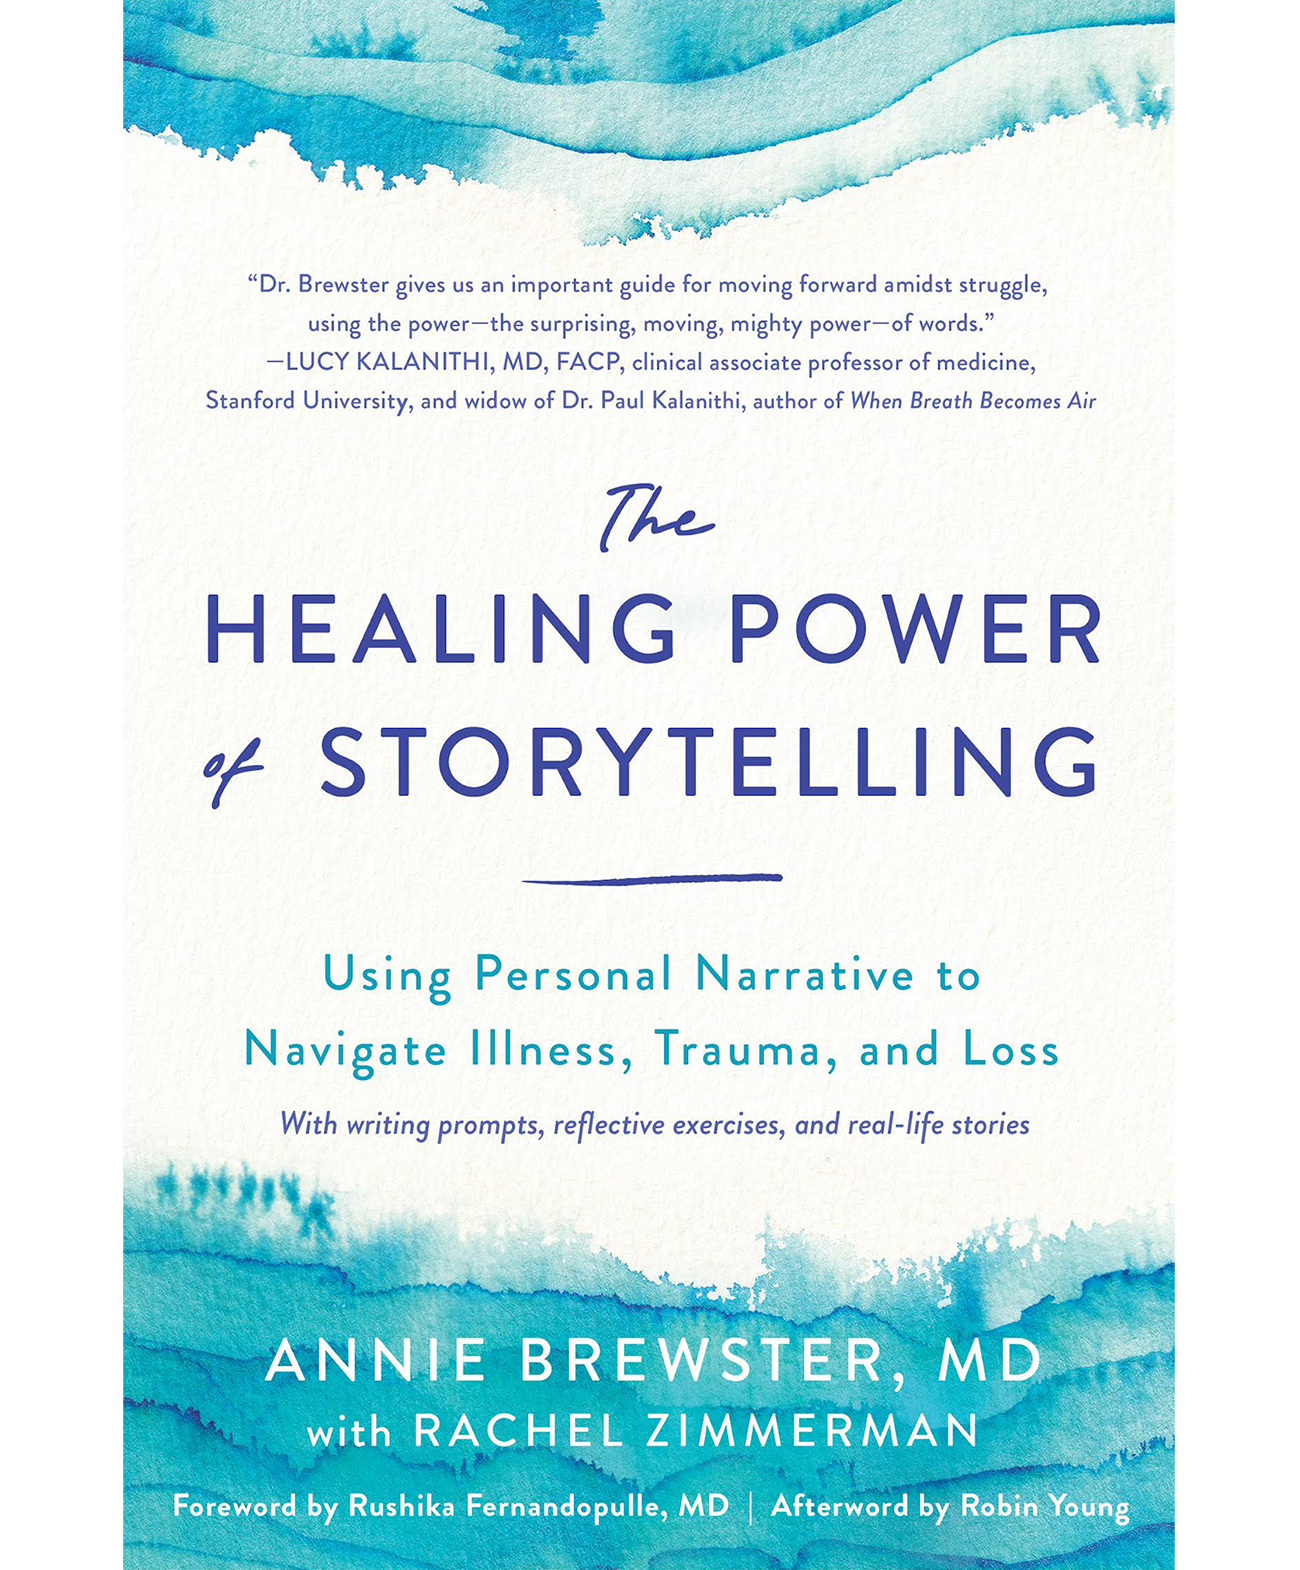 cover of The Healing Power of Storytelling, co-authored by Annie Brewster